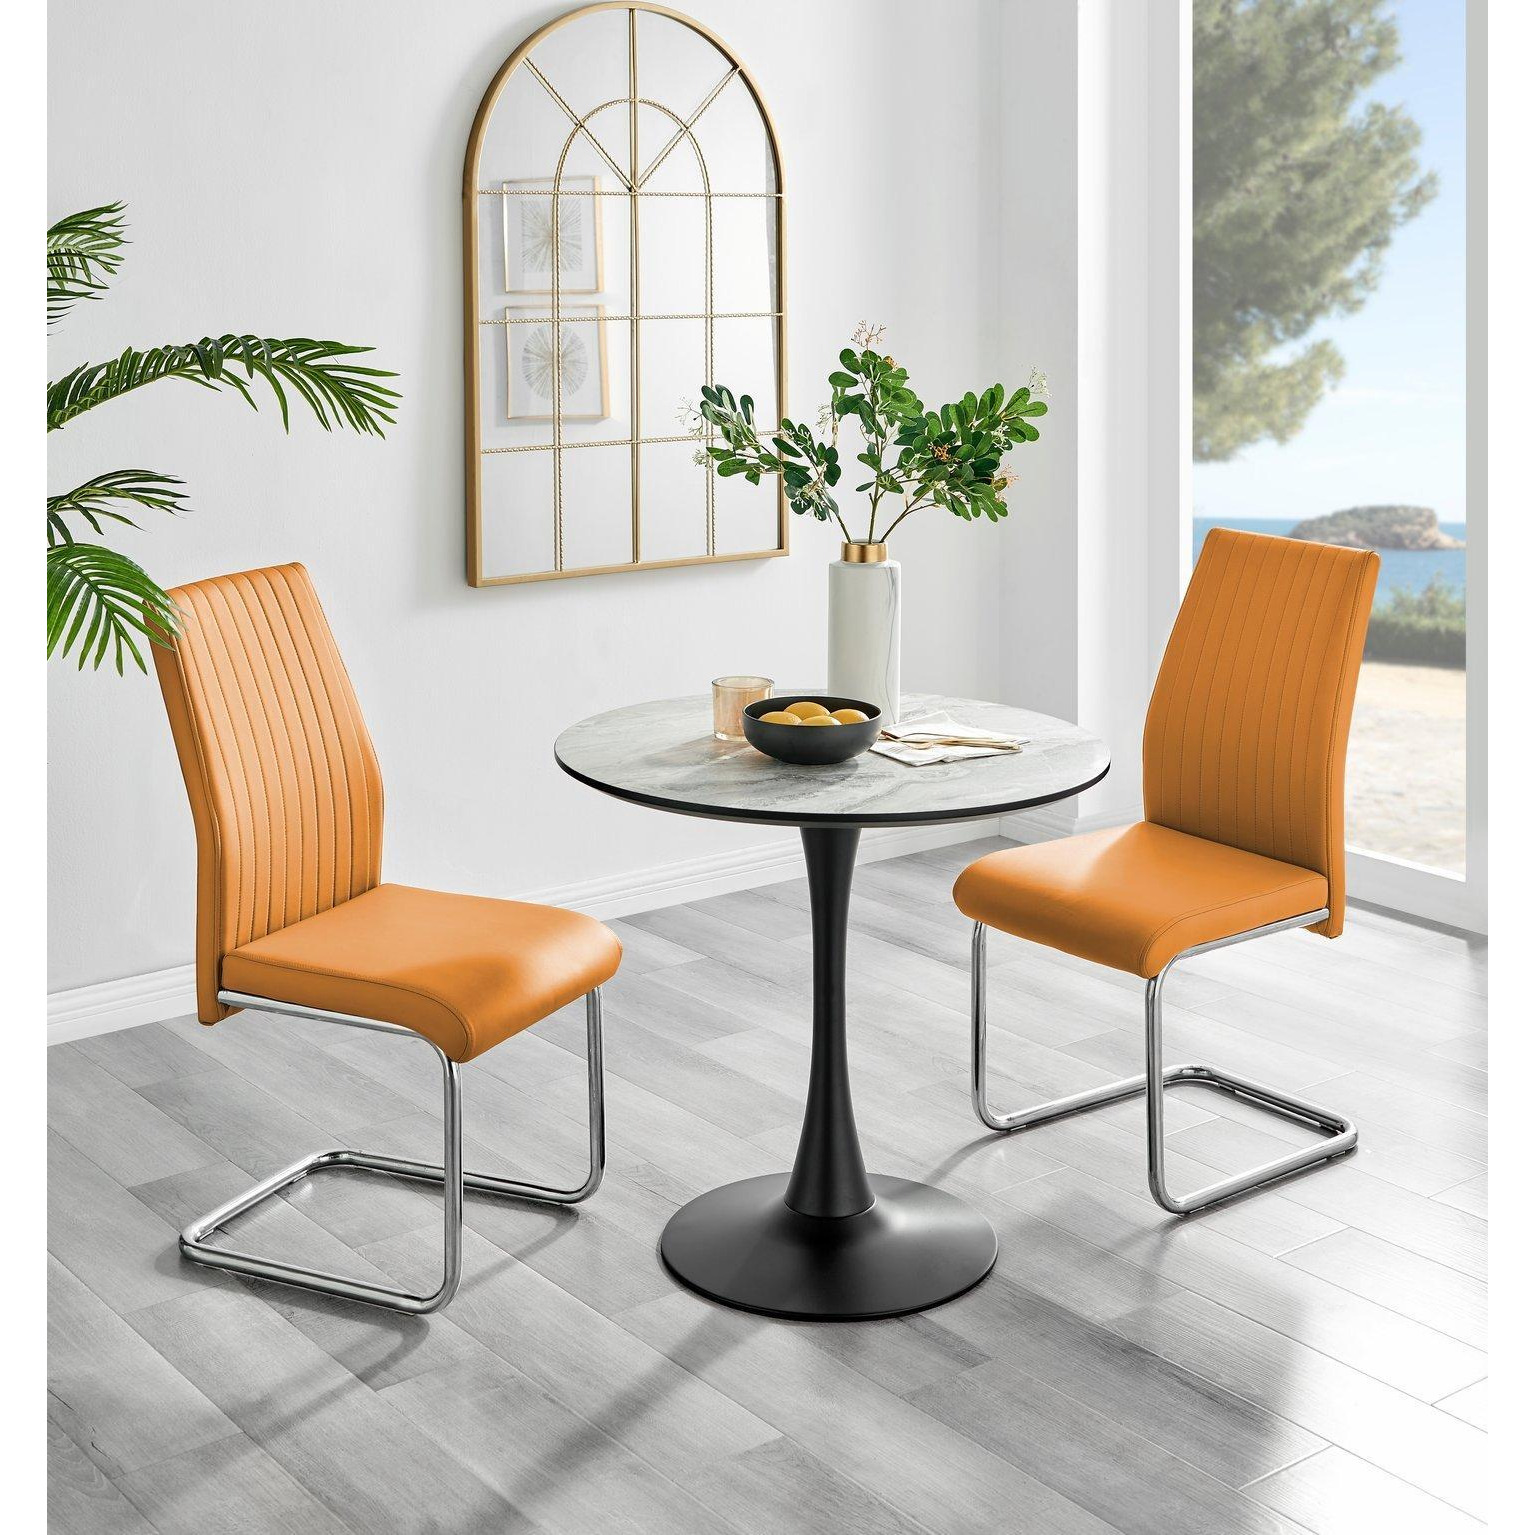 Elina White Marble Effect Scratch Resistant Dining Table & 2 Lorenzo Faux Leather Chairs - image 1